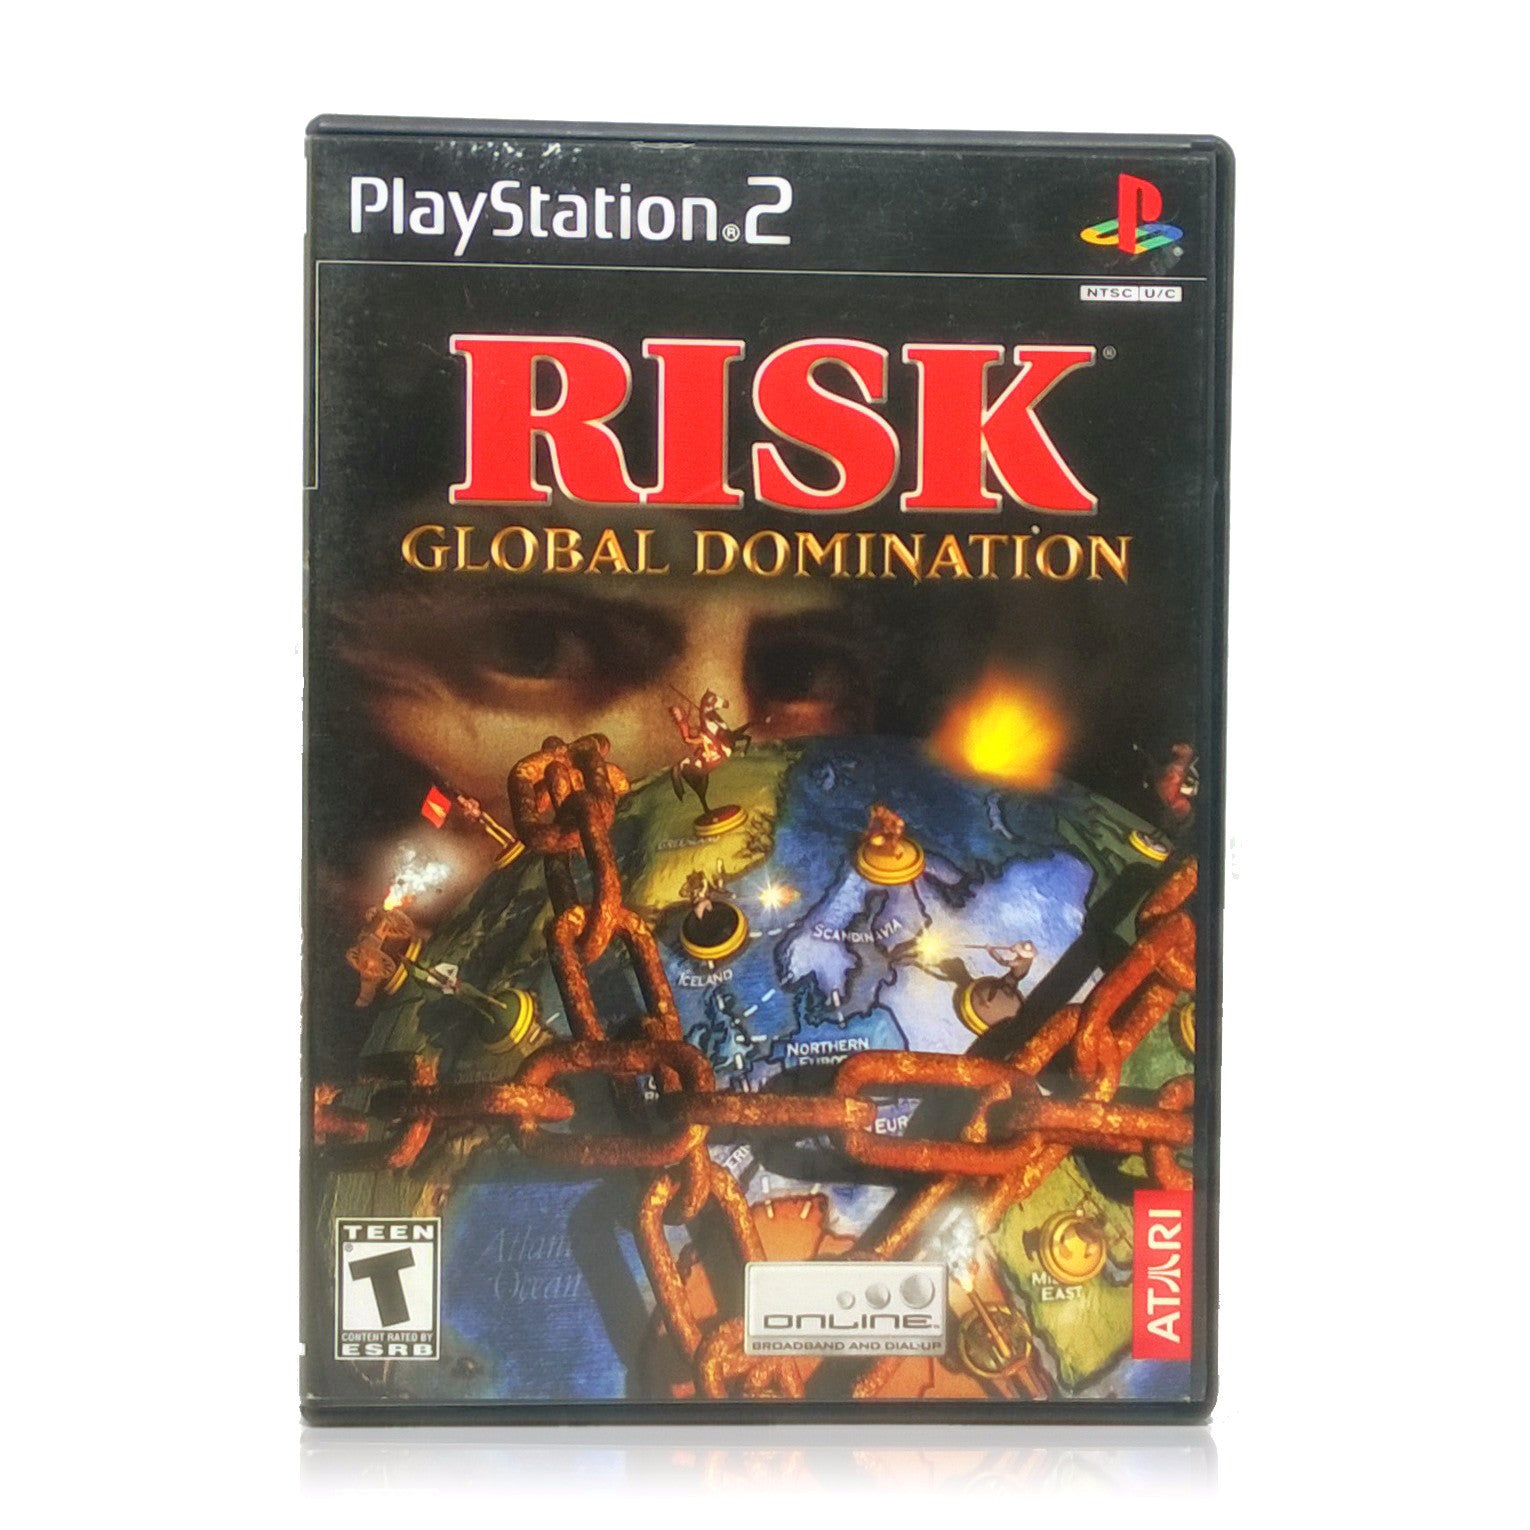 RISK: Global Domination Sony PlayStation 2 Game - Case